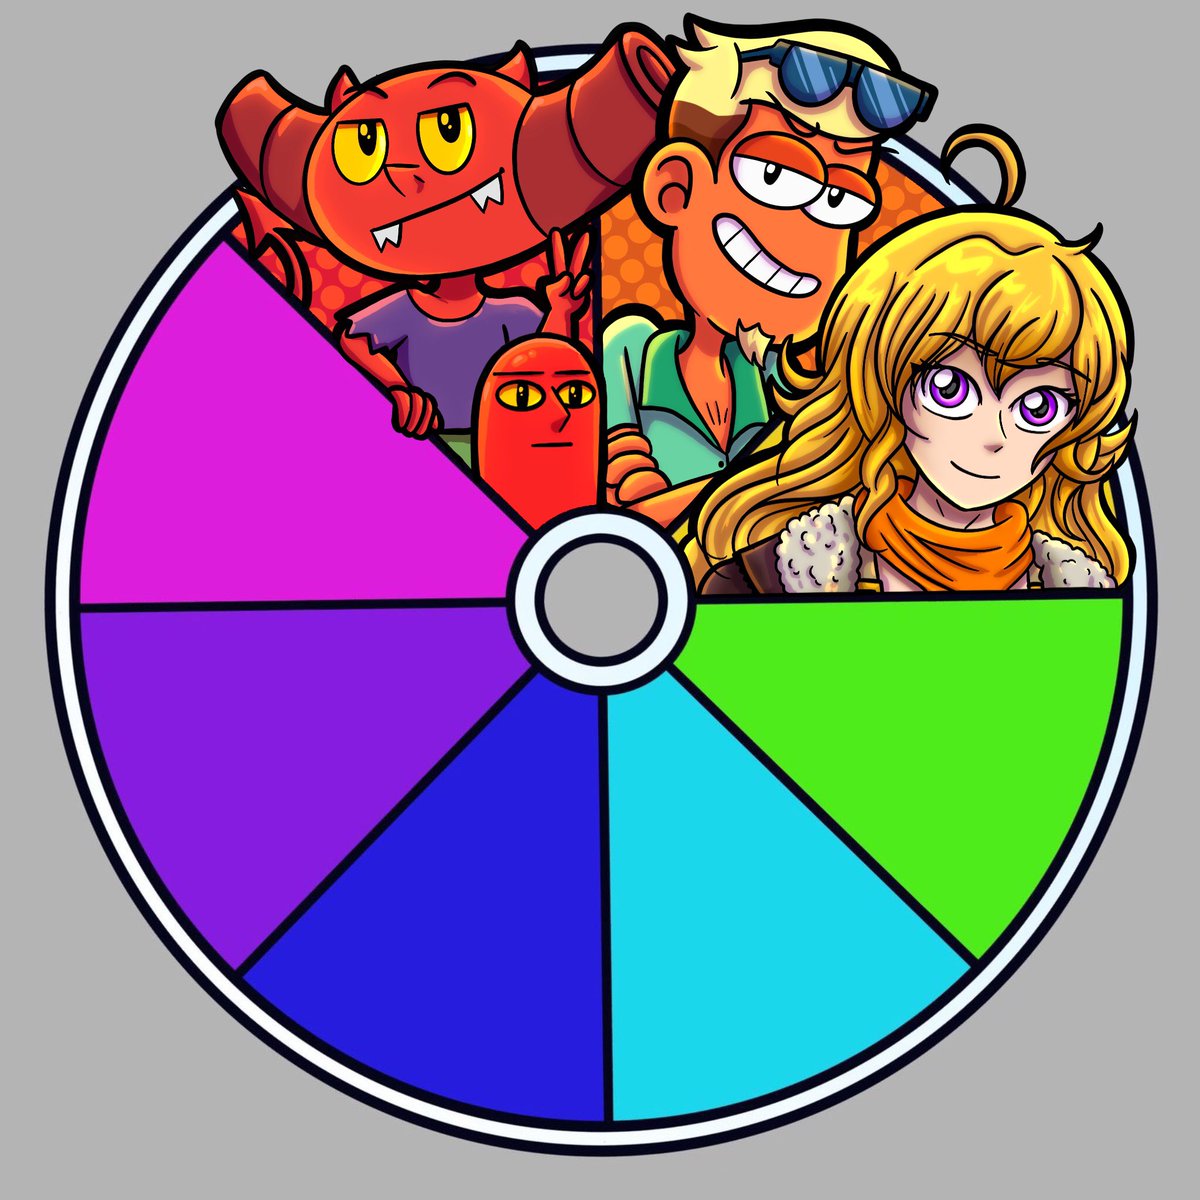 Well we all knew a #RWBY character was going to end up in here at some point! 😂 Yellow for Yang Xiao Long! Next we got that limey green color! Followers, give me suggestions! 💚

#colorwheel #colorwheelchallenge #fanartchallenge